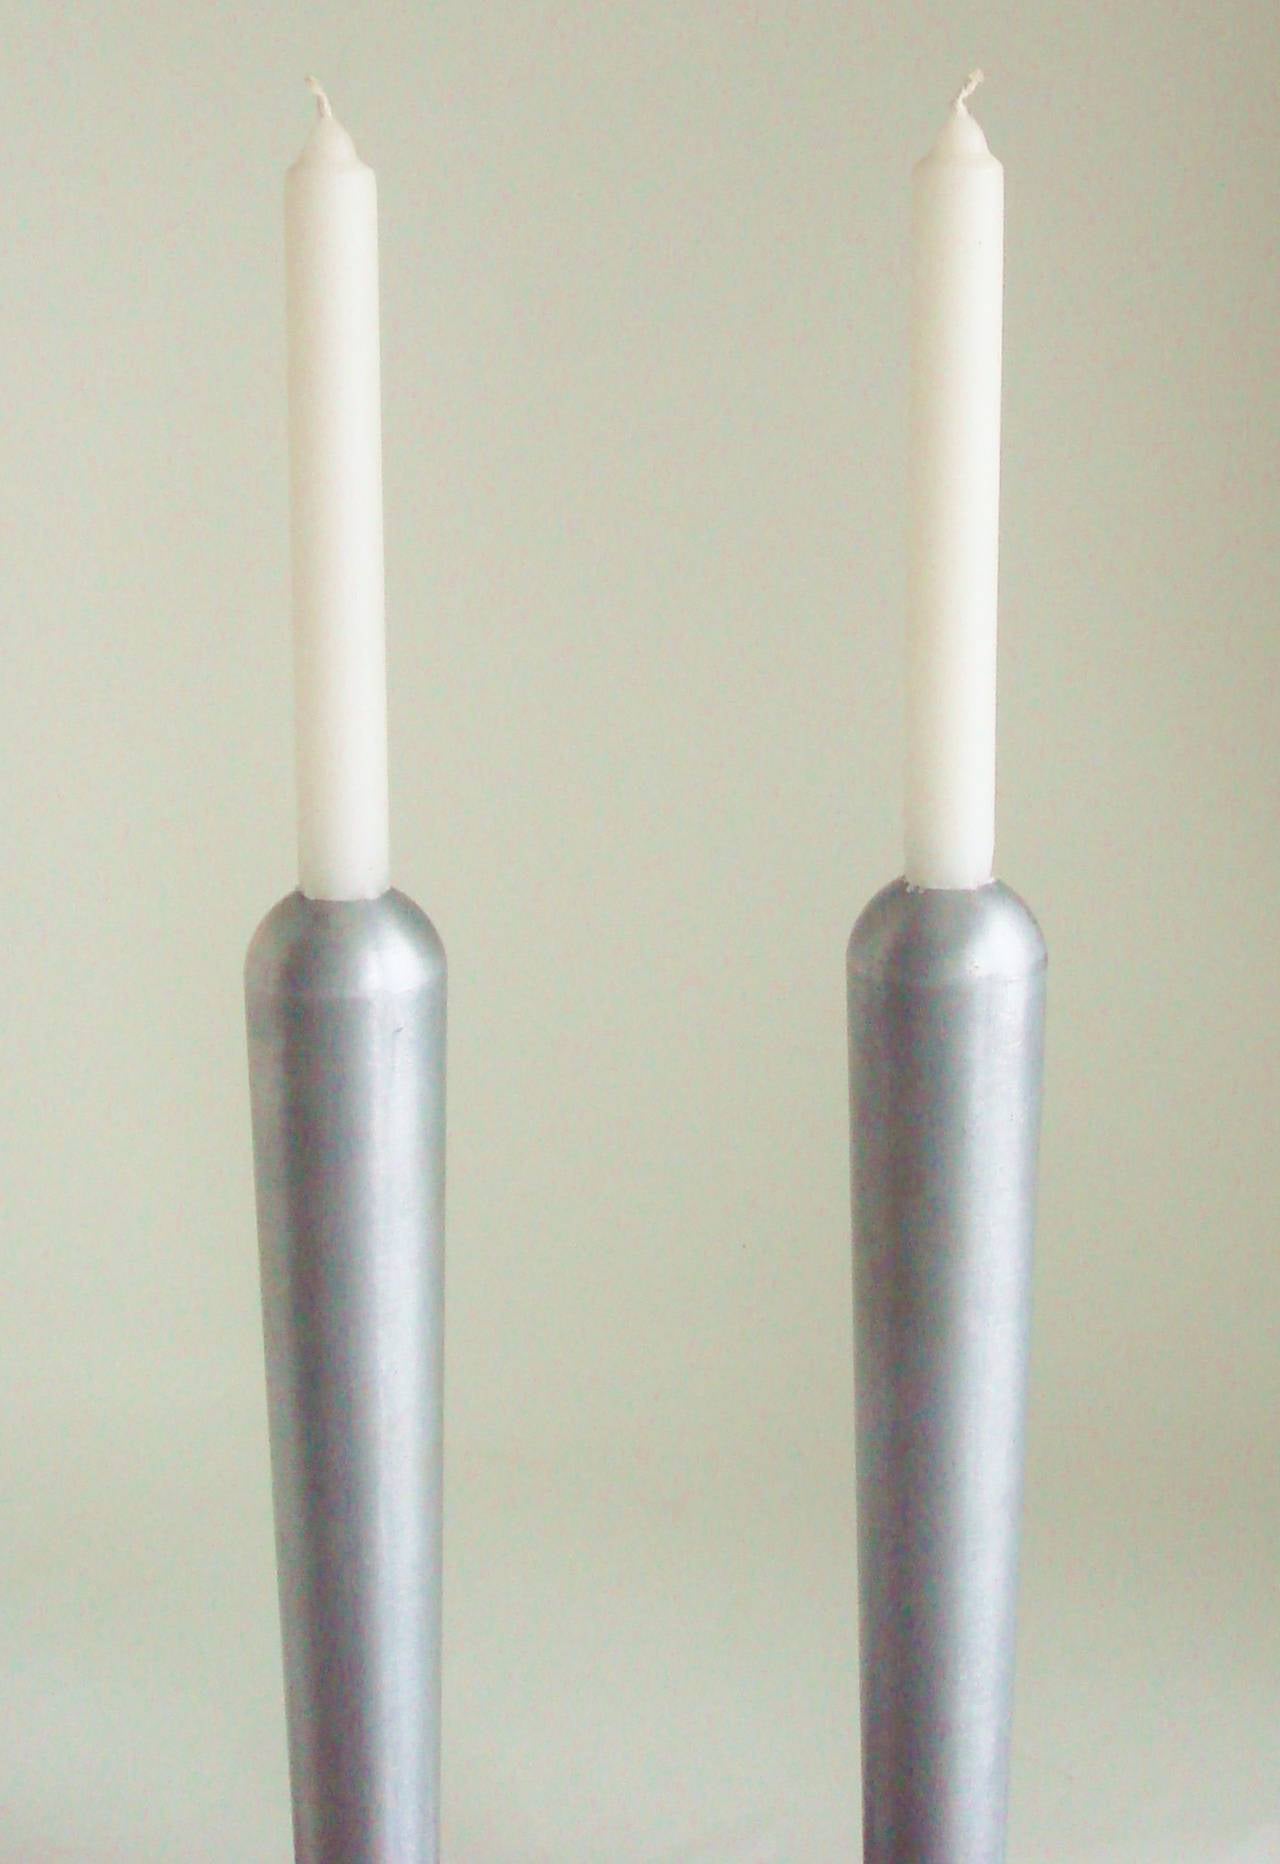 Tall and Elegant Pair of American Streamlined Moderne Aluminium Candlesticks In Good Condition For Sale In Port Hope, ON